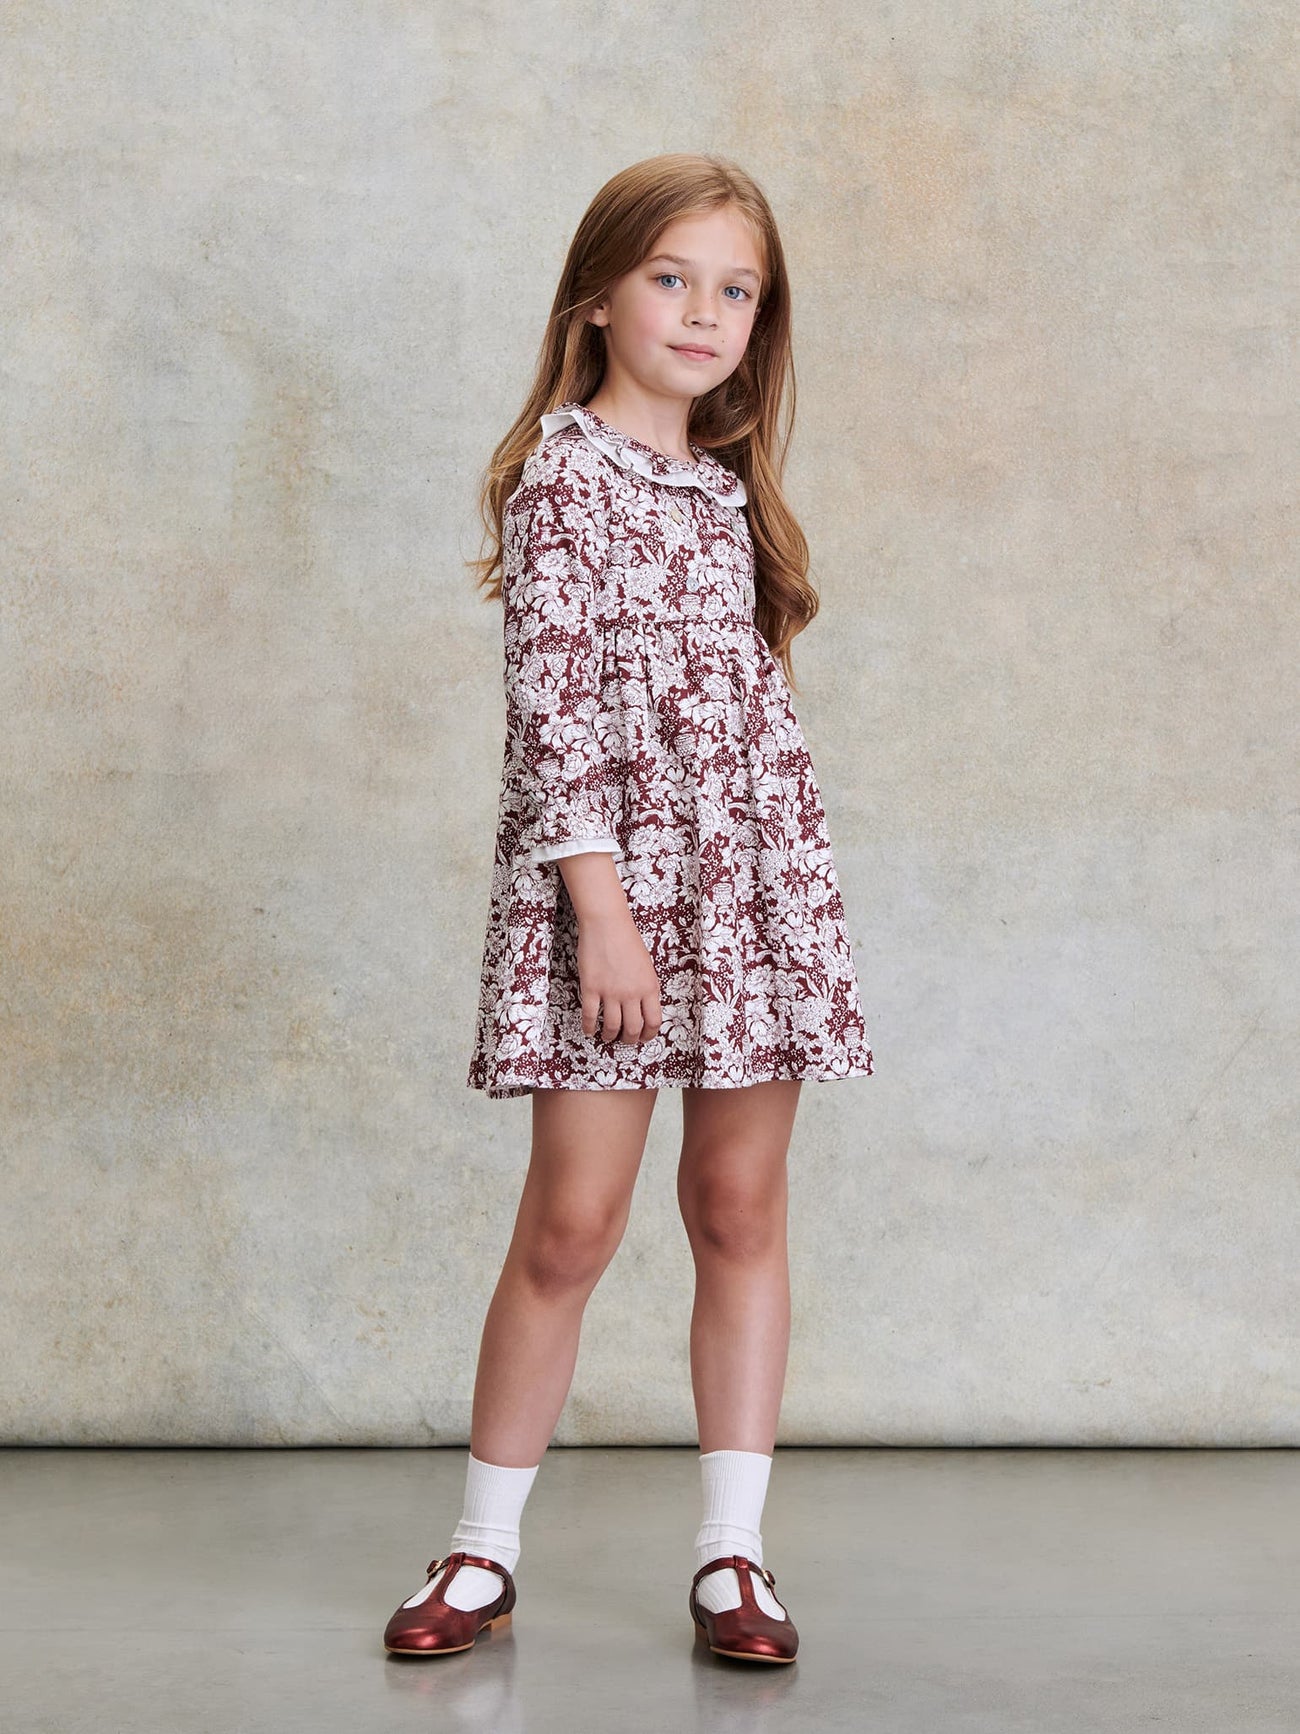 10 Year Old Girls Clothes - 10 to 11 Years Girls Clothes – La Coqueta Kids